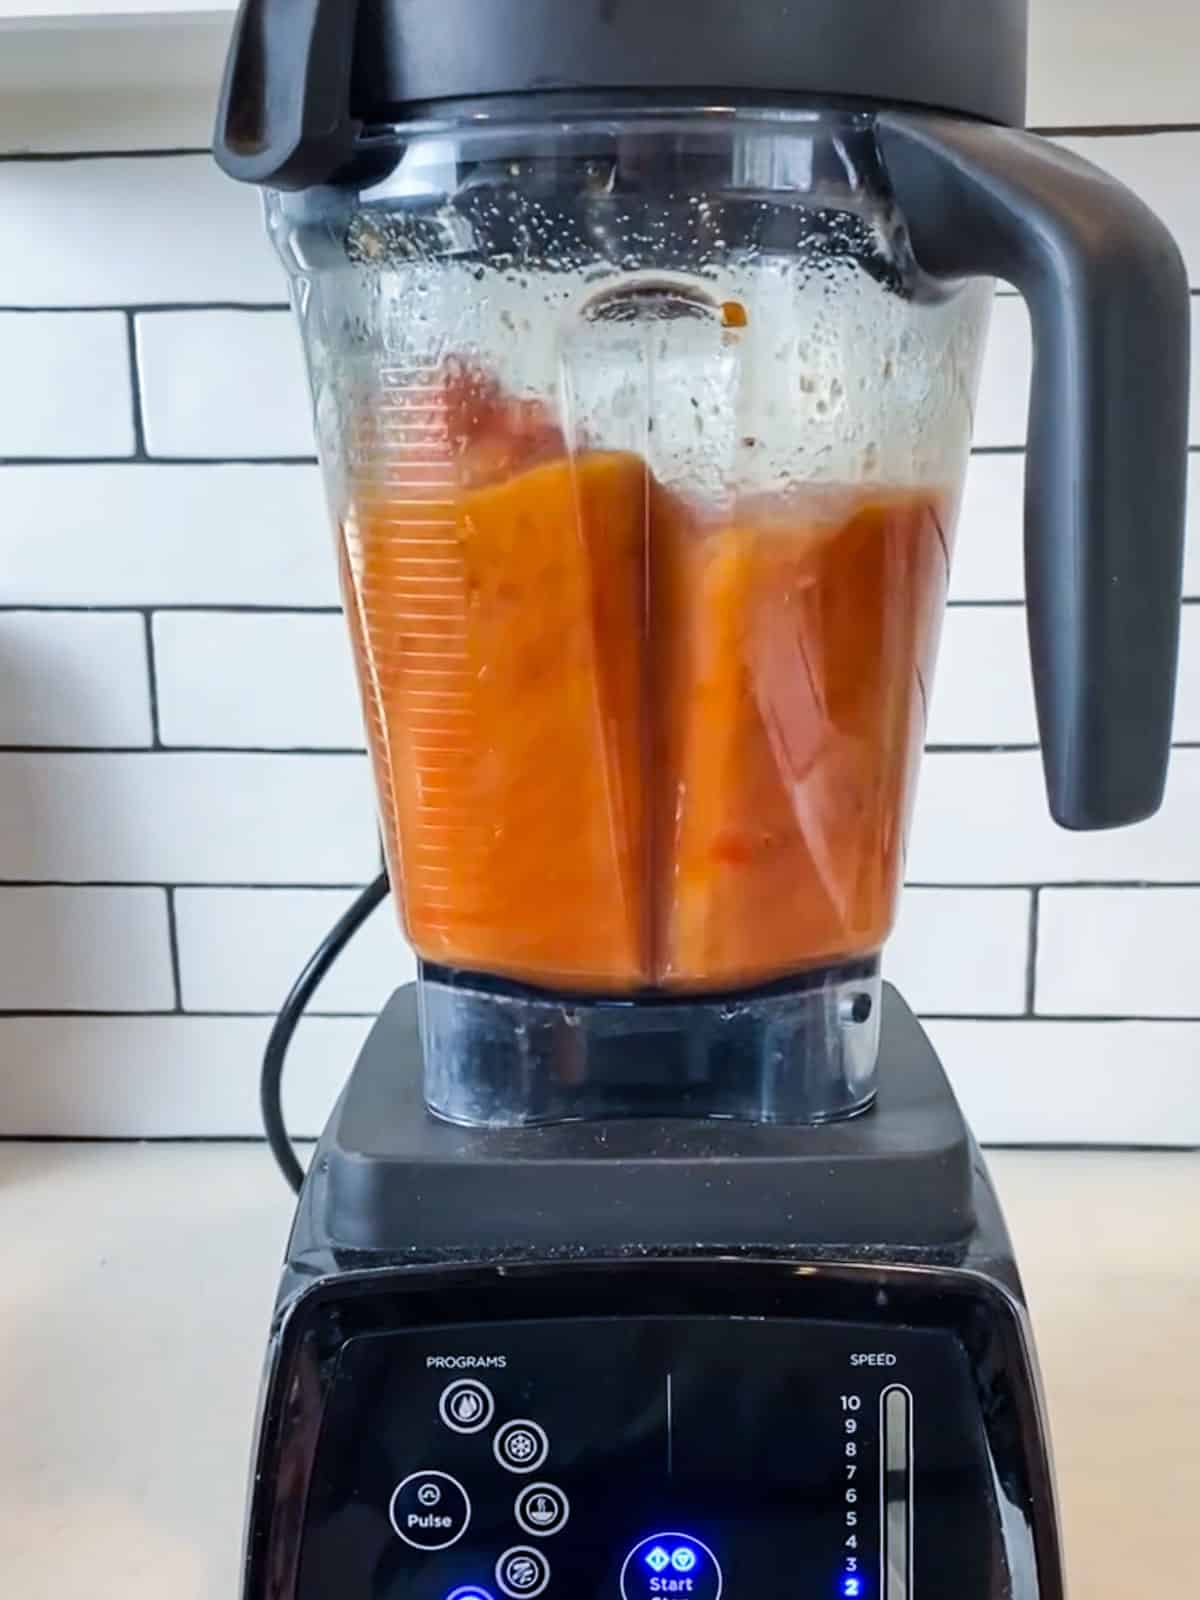 Blend the roasted tomato soup in a blender until smooth.